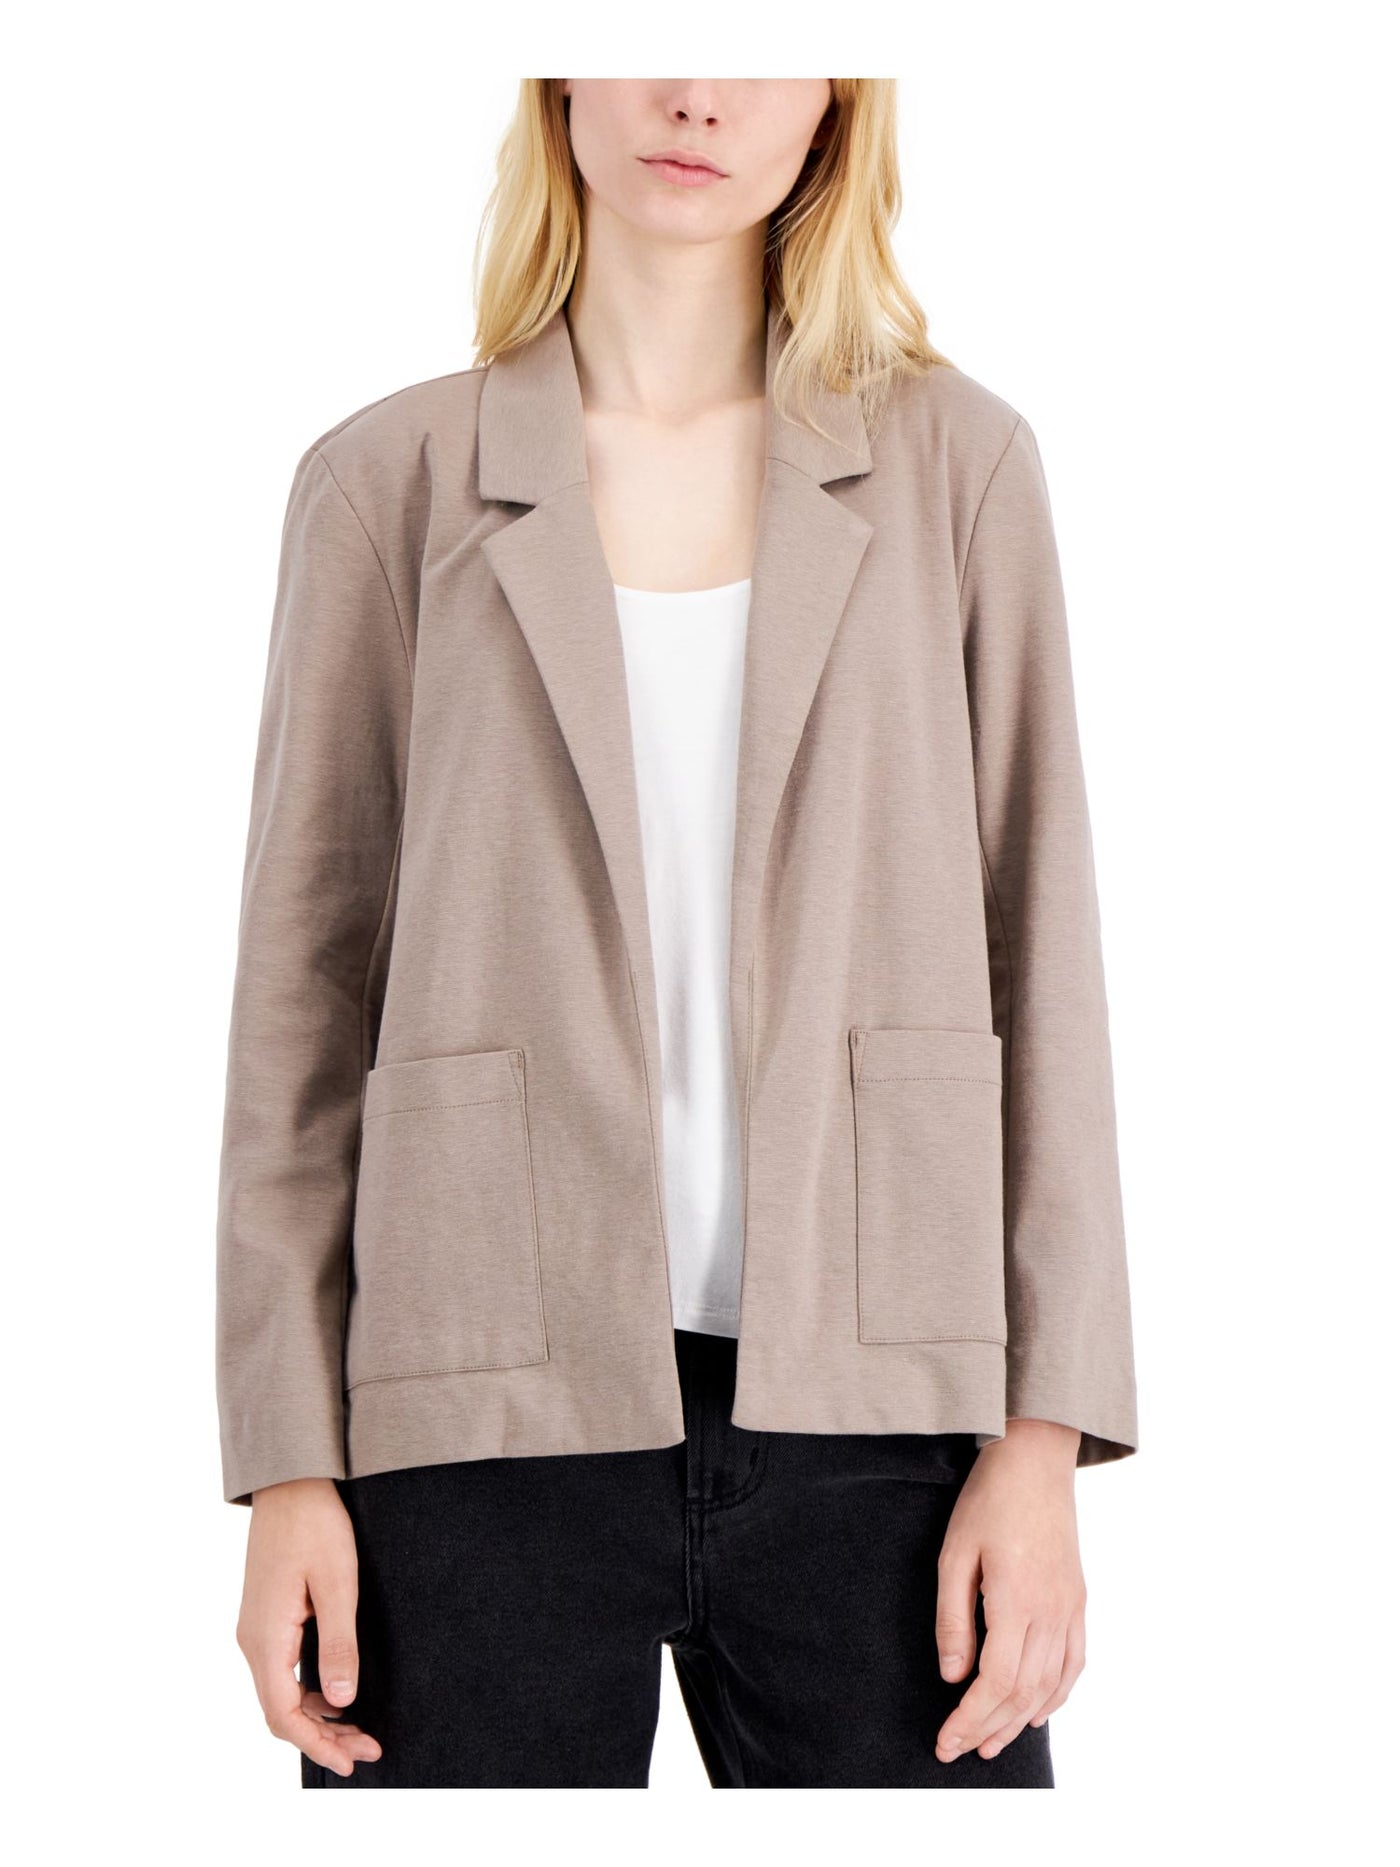 EILEEN FISHER Womens Beige Pocketed Open Front Notched Lapels Heather Blazer Jacket Petites PM